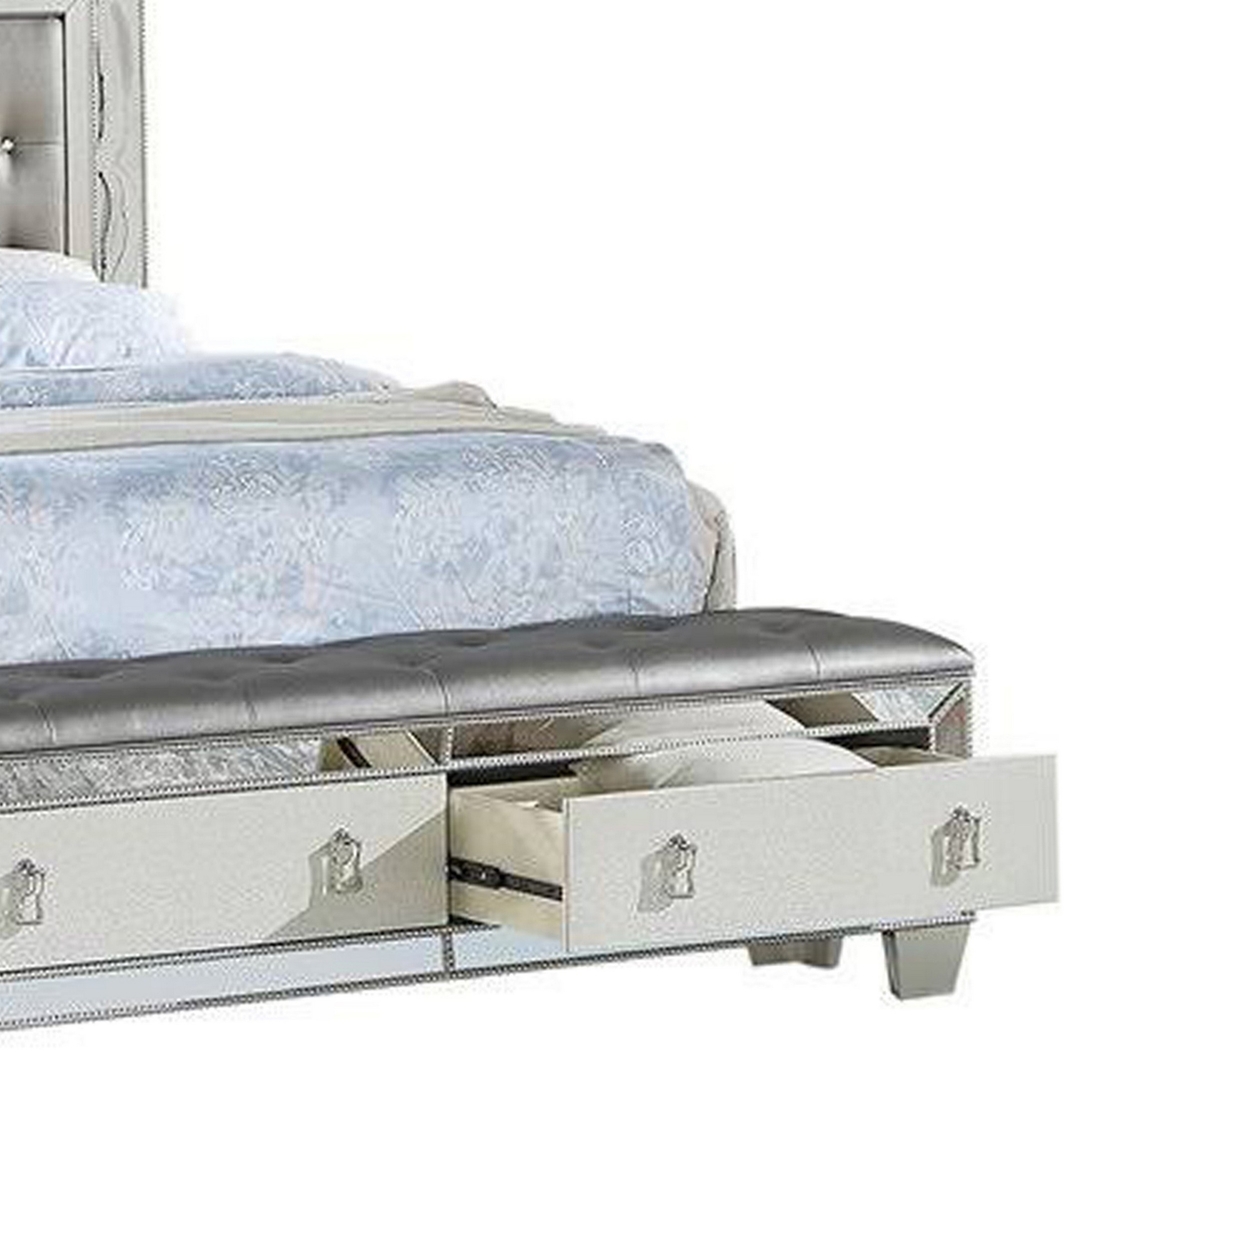 Reva Queen Bed, Storage Footboard, Silver Faux Leather Tufted Upholstery- Saltoro Sherpi